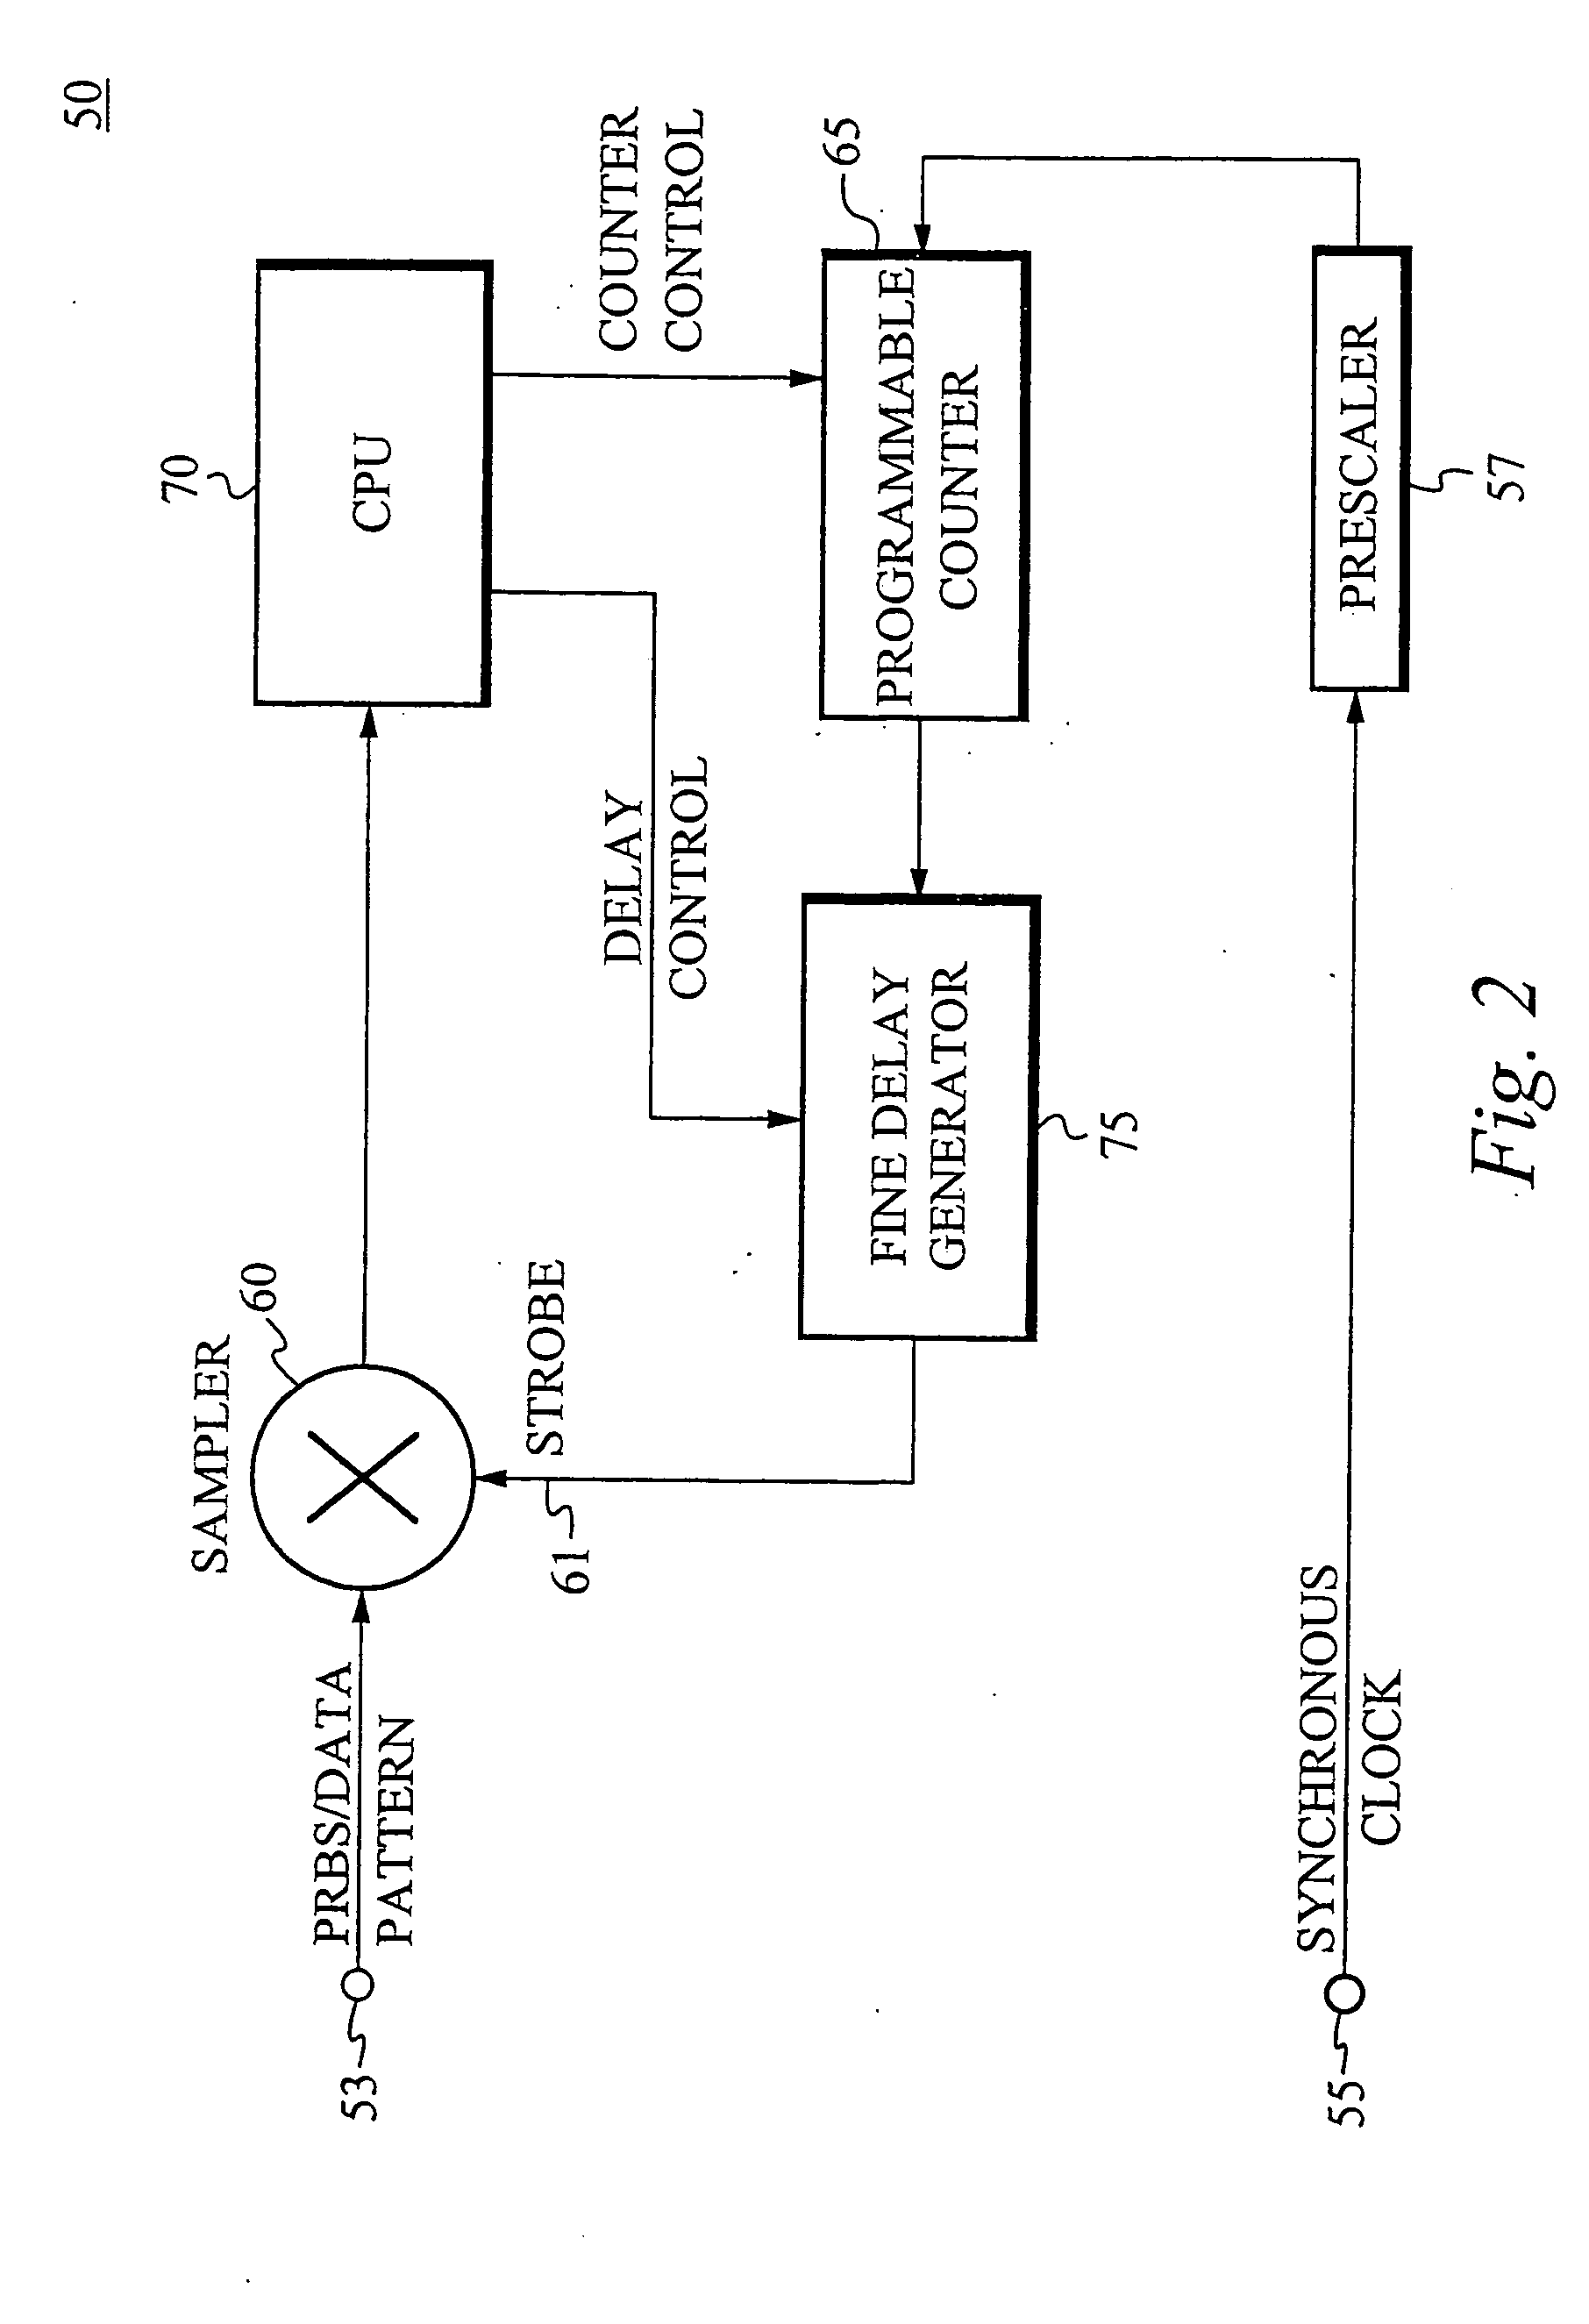 Method of and apparatus for measuring jitter and generating an eye diagram of a high speed data signal